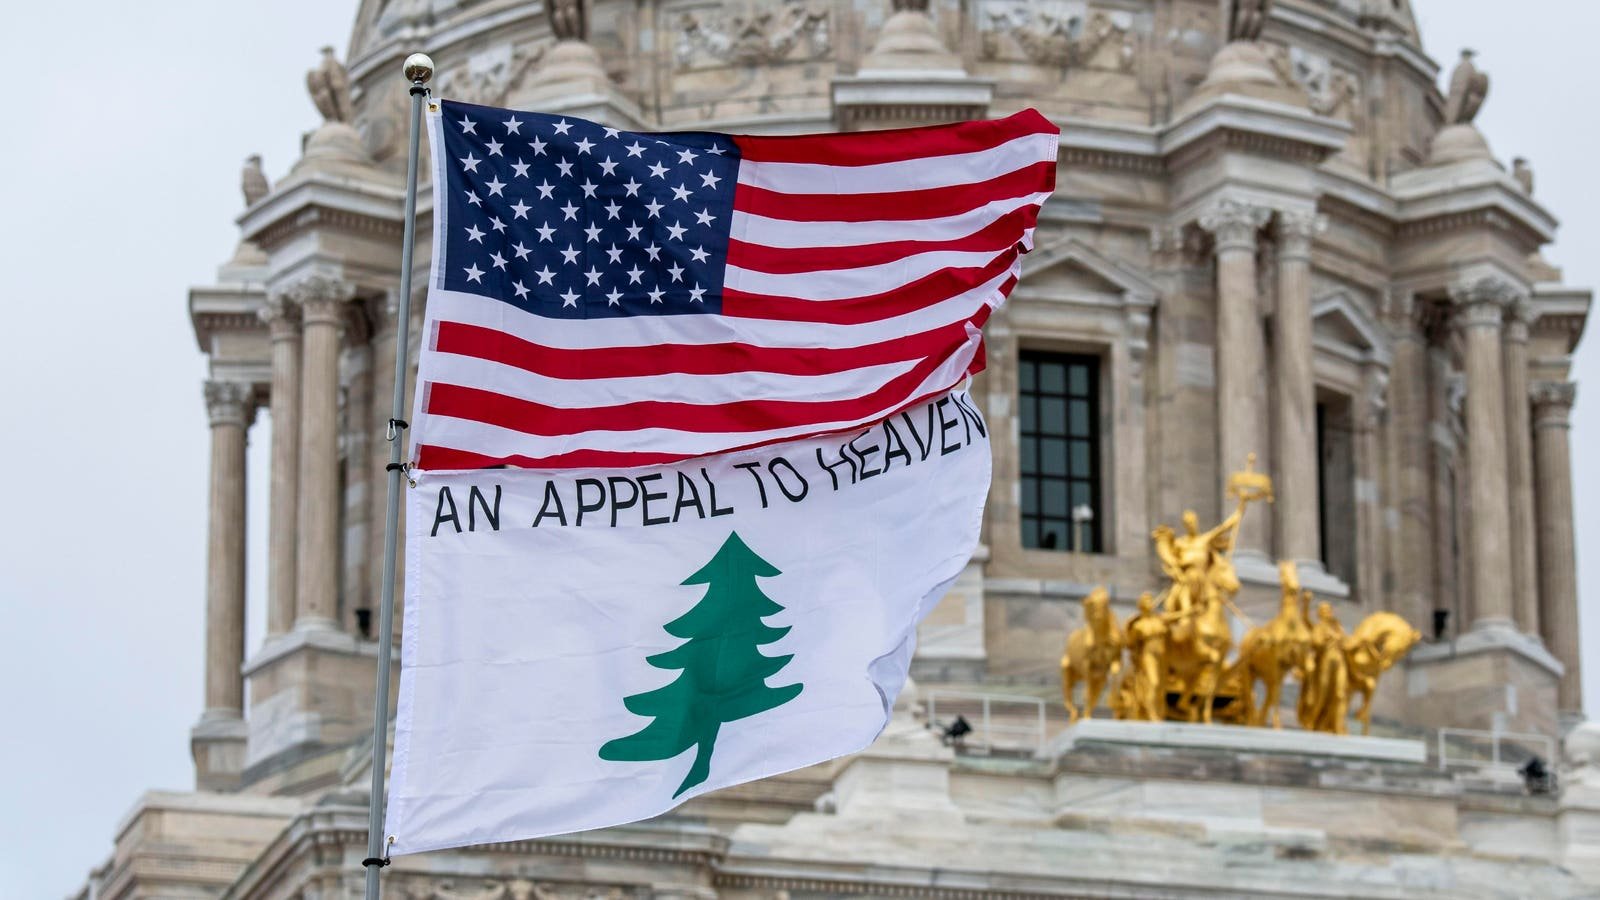 What to know about the 'Appeal To Heaven' flag